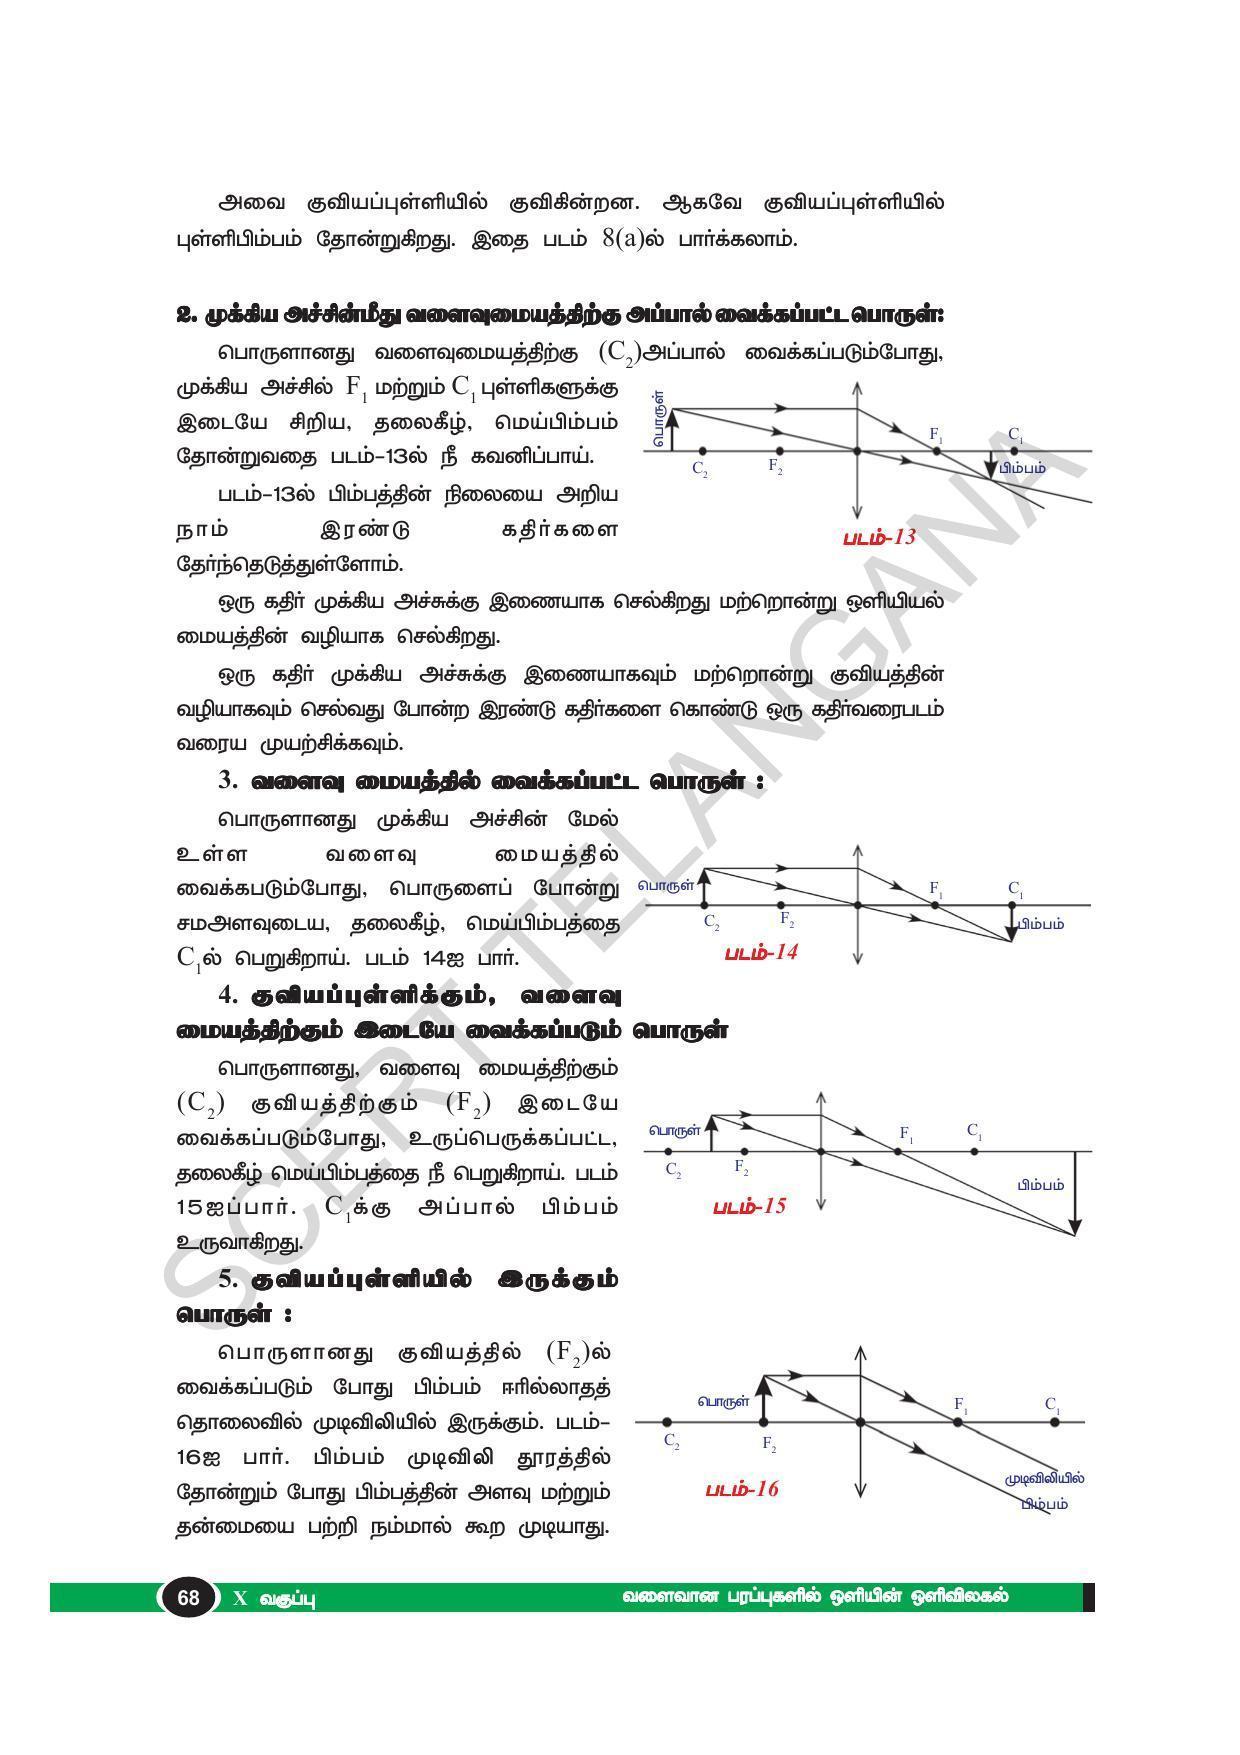 TS SCERT Class 10 Physical Science(Tamil Medium) Text Book - Page 80